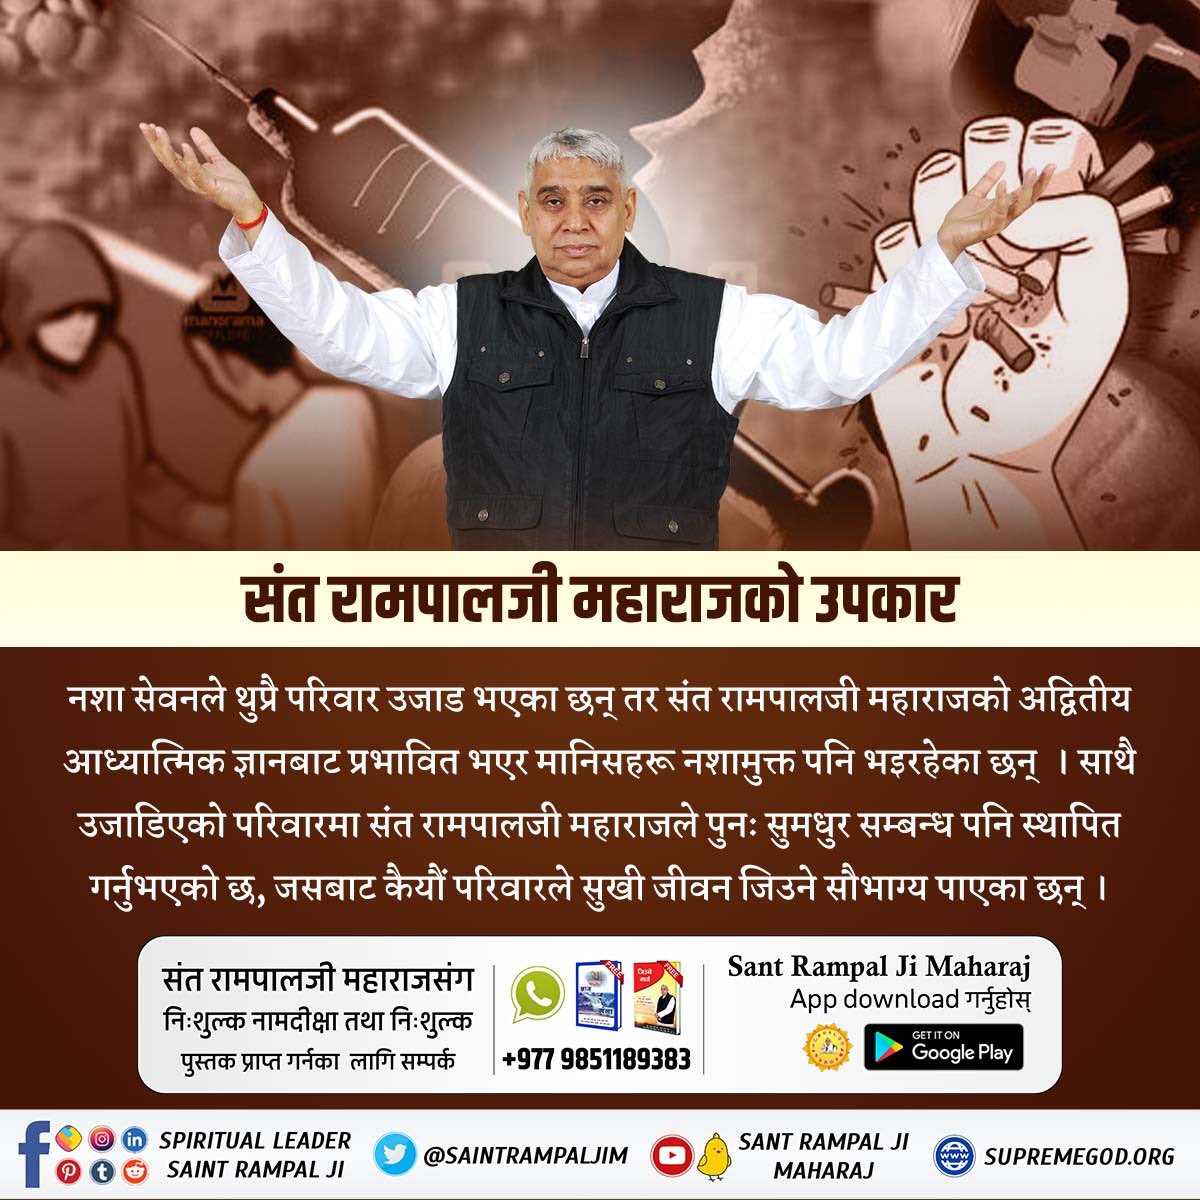 #महान_परोपकारी_सन्तरामपालजी
Today in this world there is no knowledge and no solution. If not, the knowledge of Saint Rampalji is tile in some way.